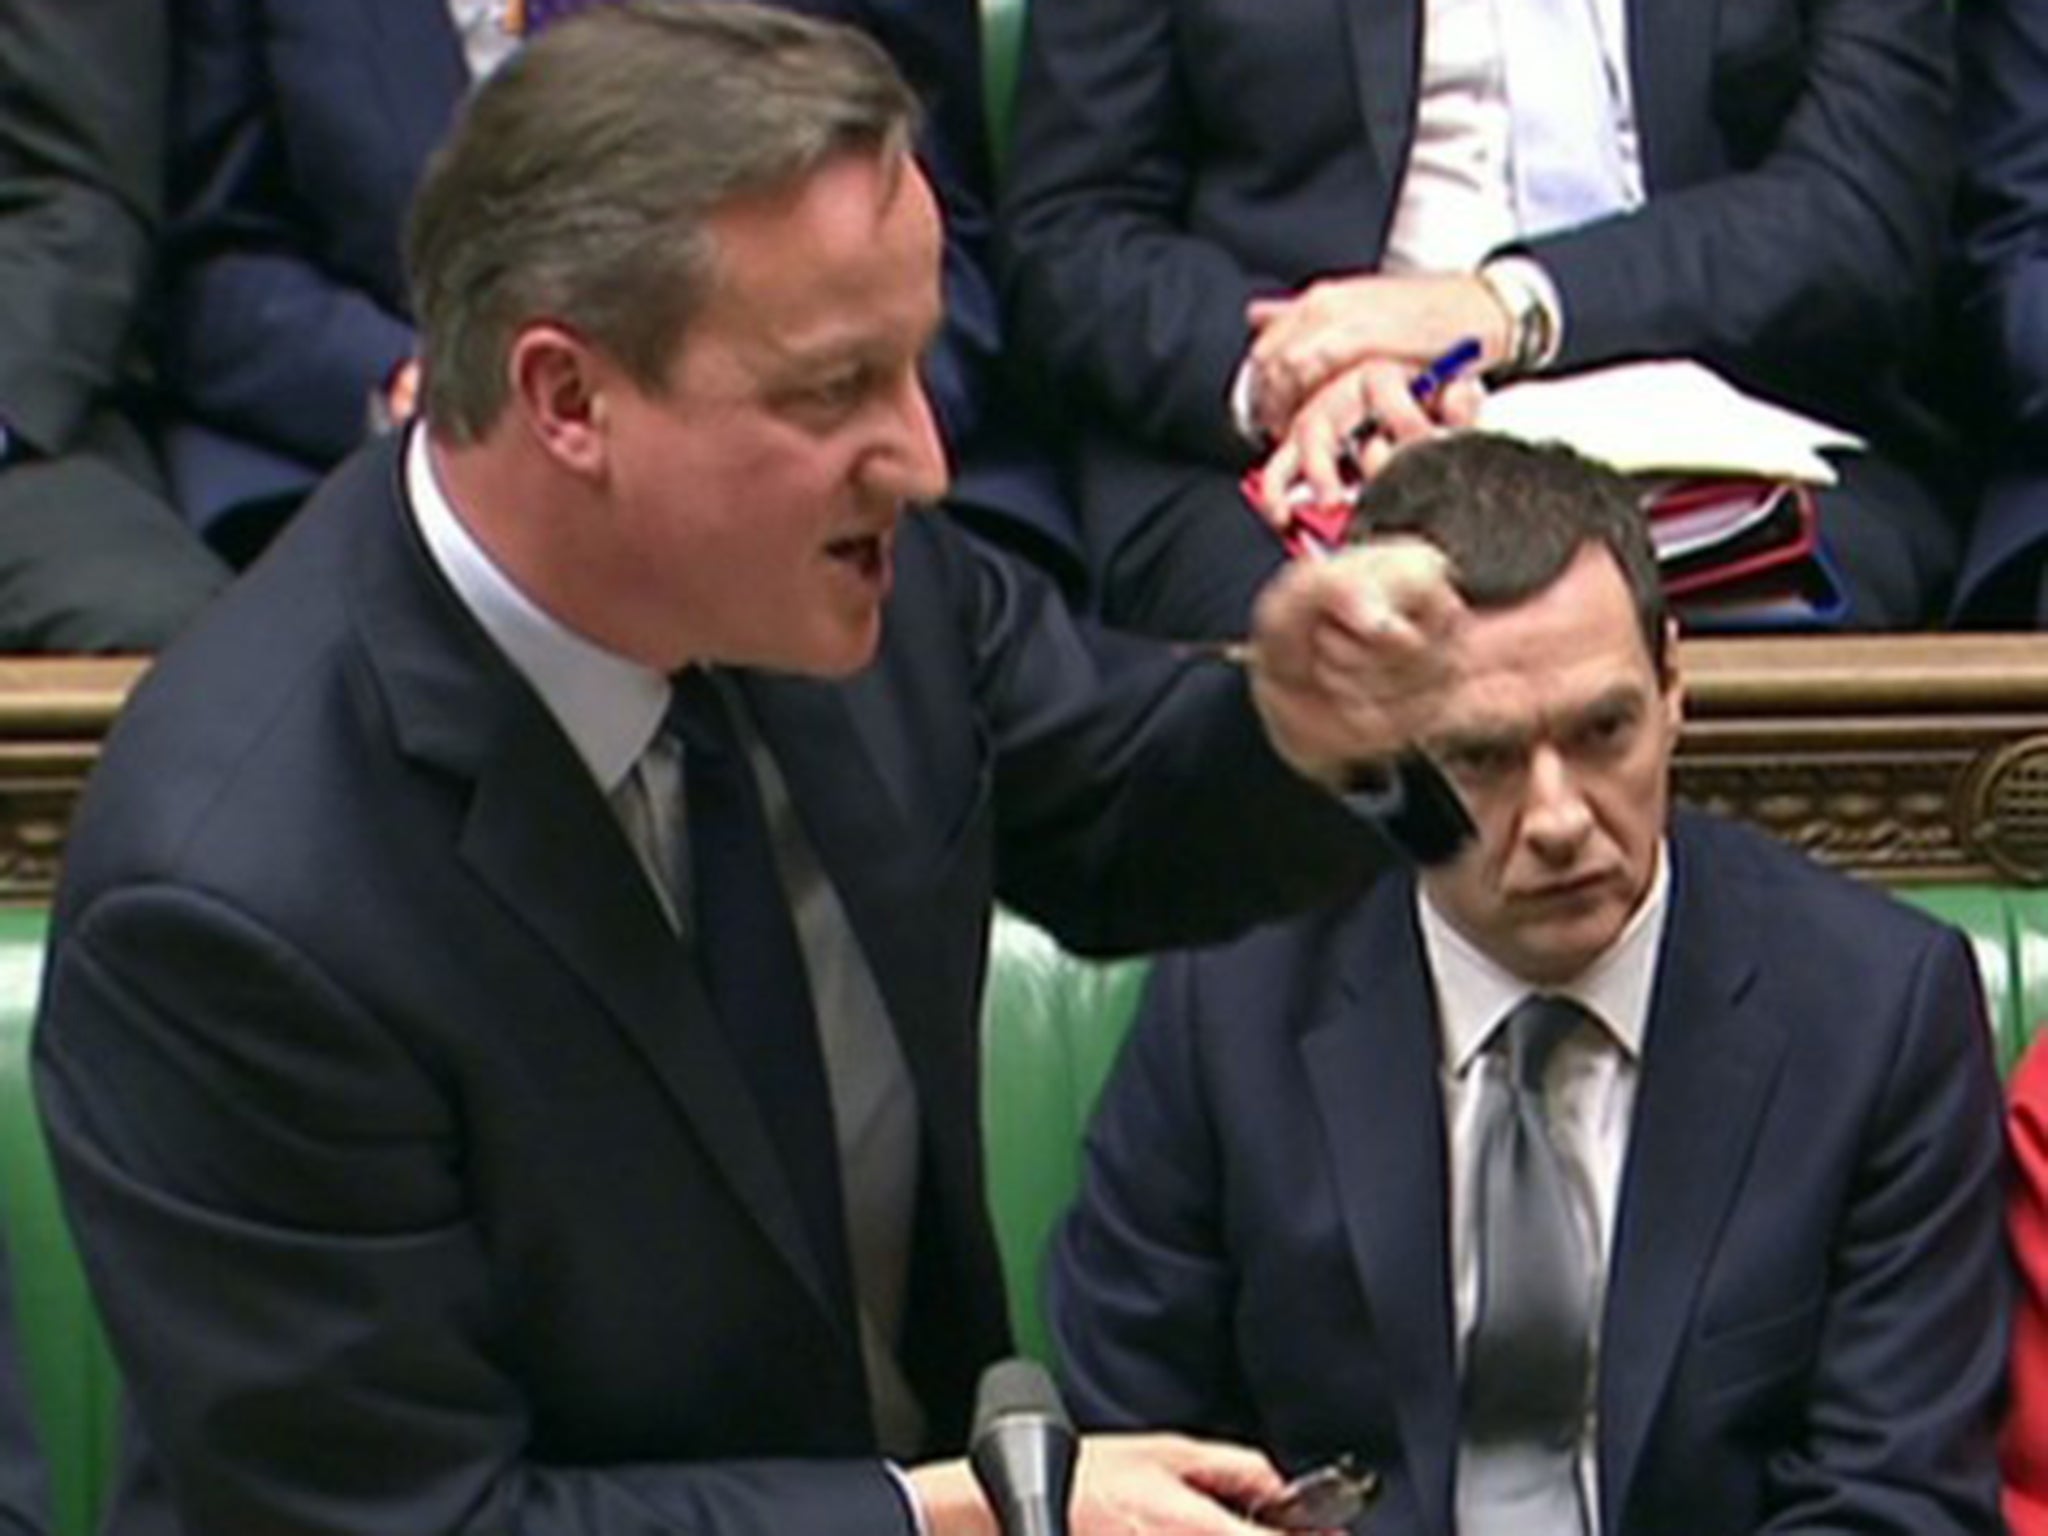 Cameron can rehearse for PMQs, but in committee he must think on his feet